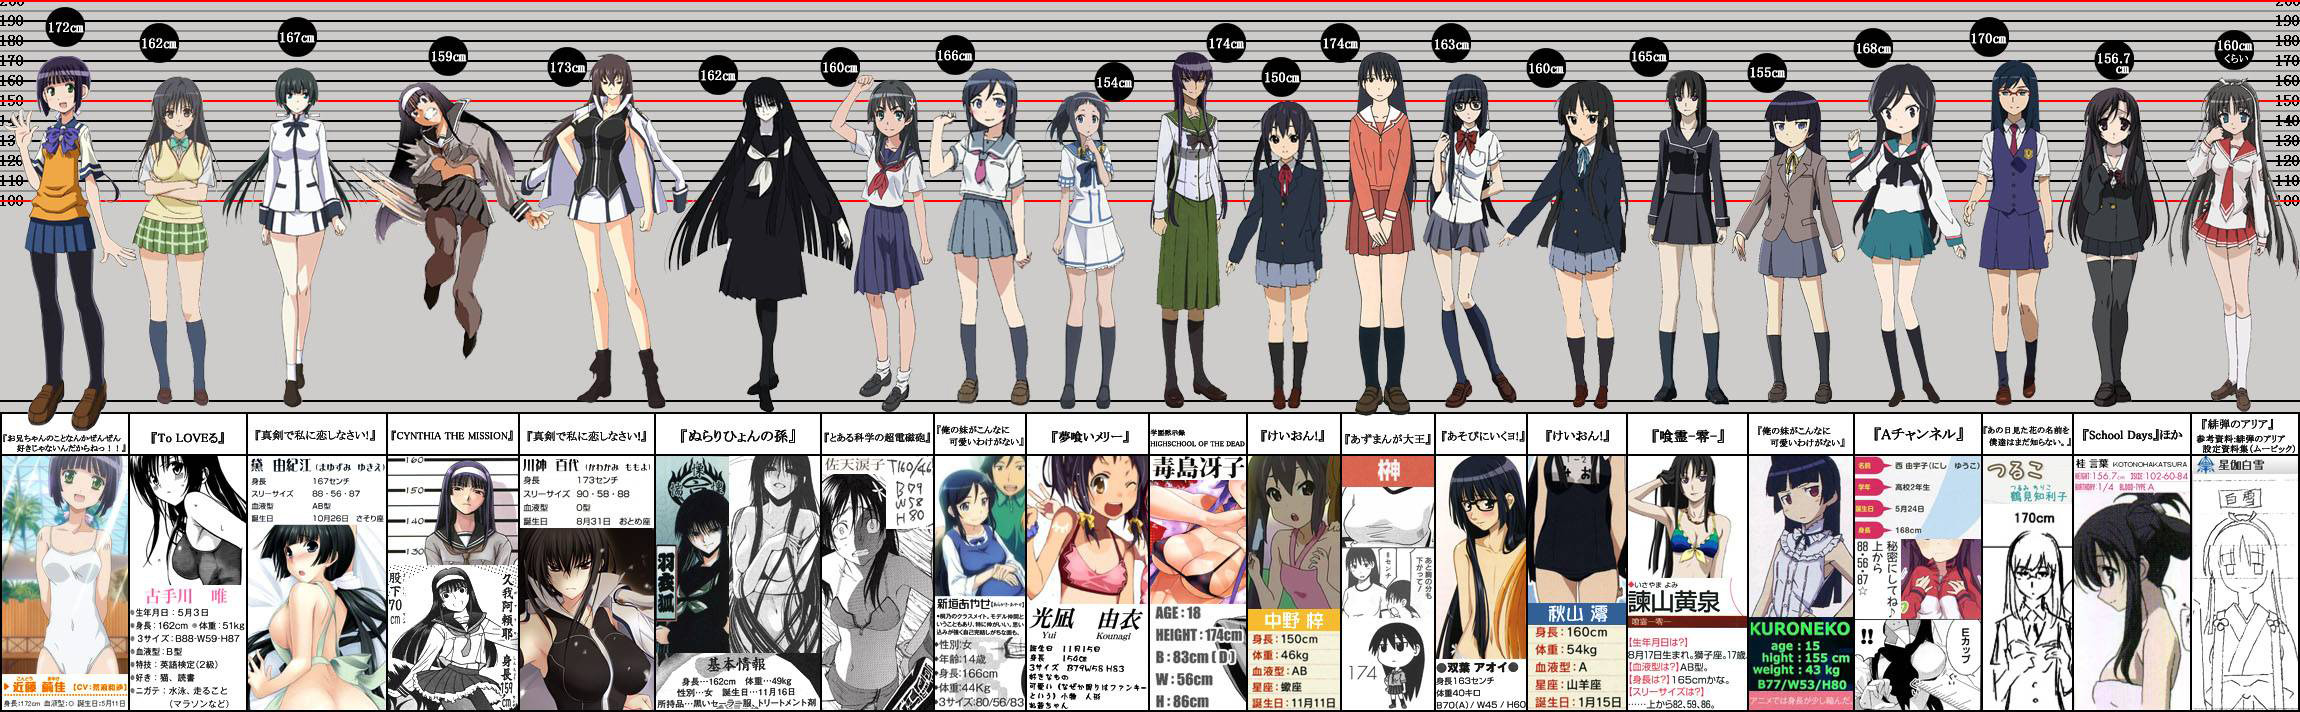 Black-Hair-Female-Anime-Characters-Height-Comparison-Chart